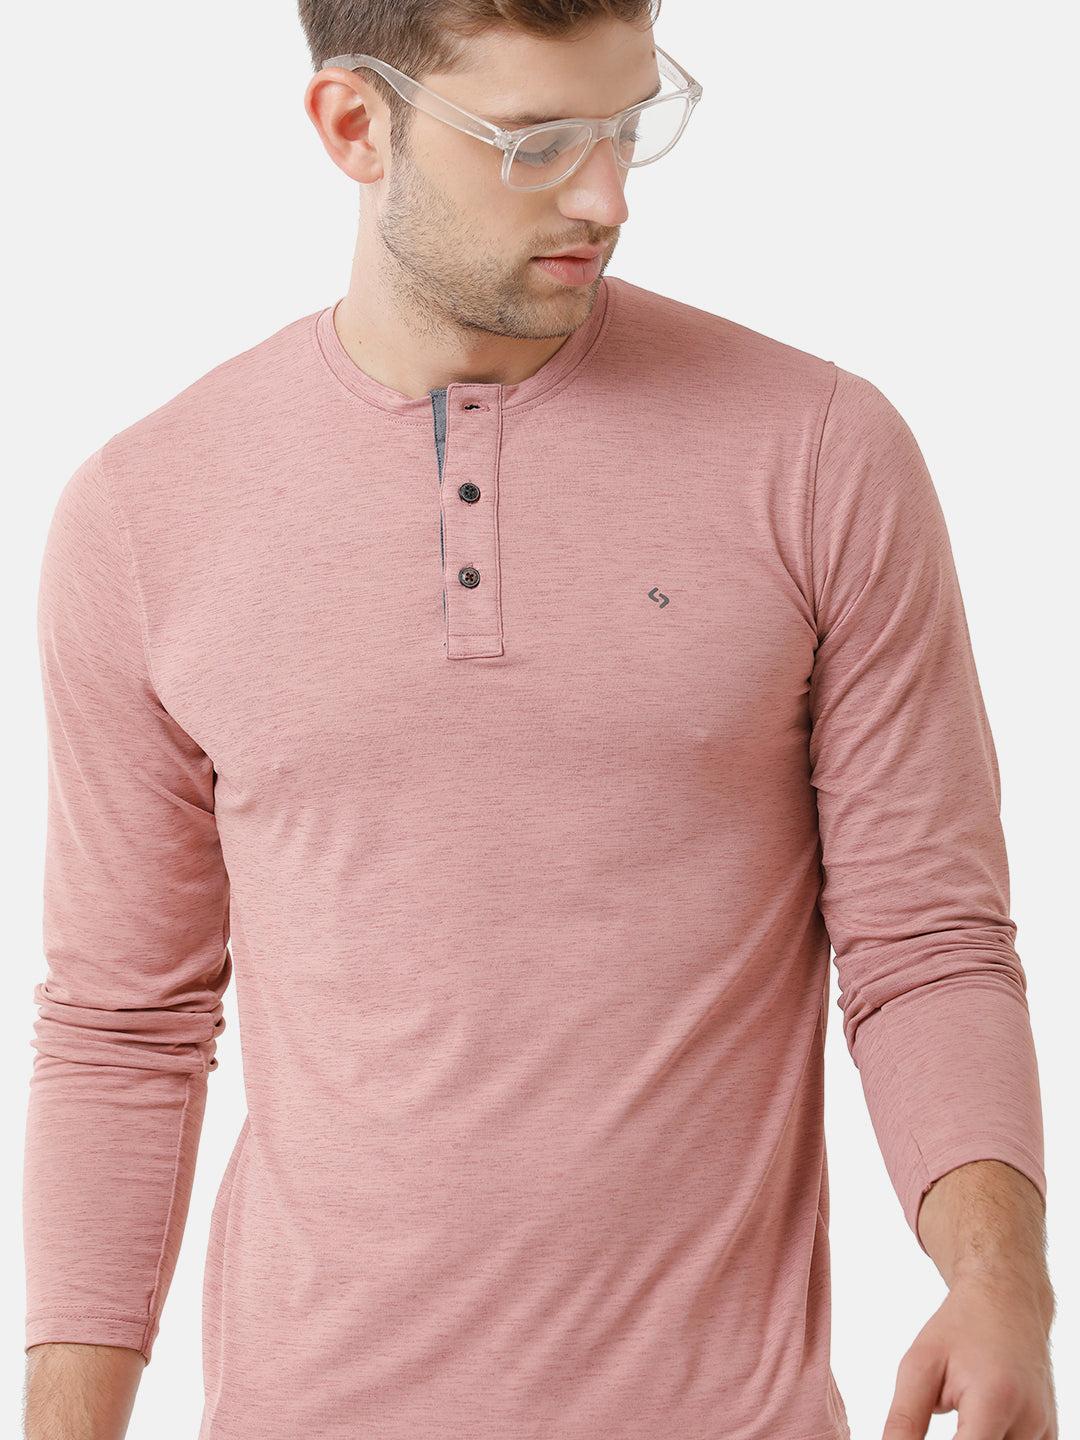 Classic Polo Mens Cotton Solid Full Sleeve Slim Fit Y Neck Peach Color T-Shirt | Verno 308 B